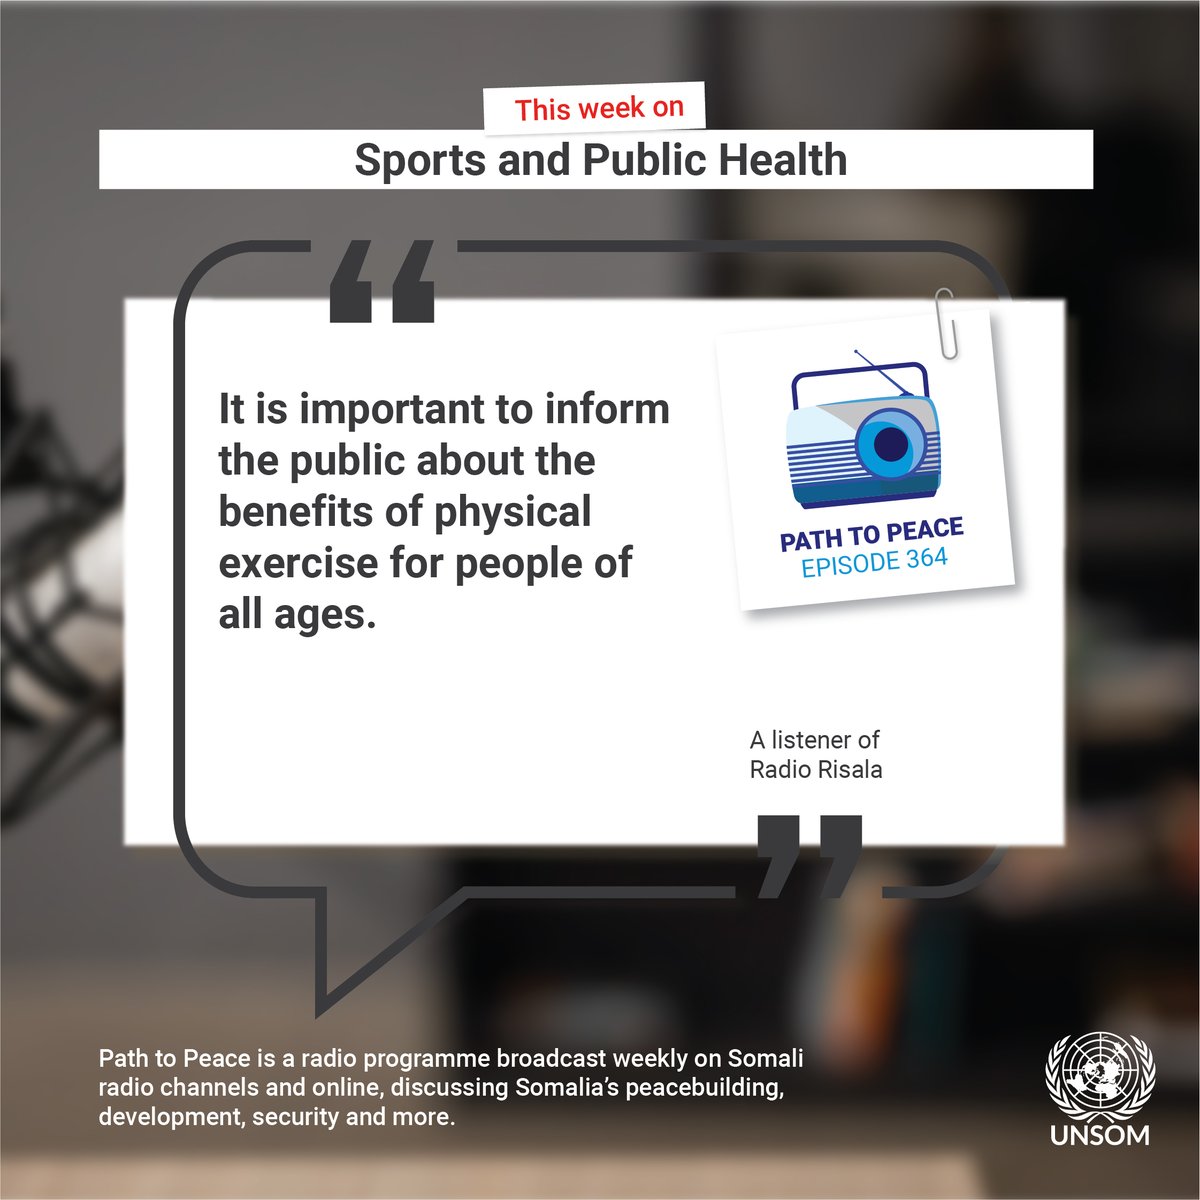 #ICYMI - Listen to the latest episode of #TubtaNabadda, to learn about the importance of physical exercise and public health services in #Somalia from Dr. Fartun Sharif of #Banadir Hospital and Dr. @Naajigentle1 of Gacal Polyclinic. ▶️ Listen here: unsom.info/3PRkoTF